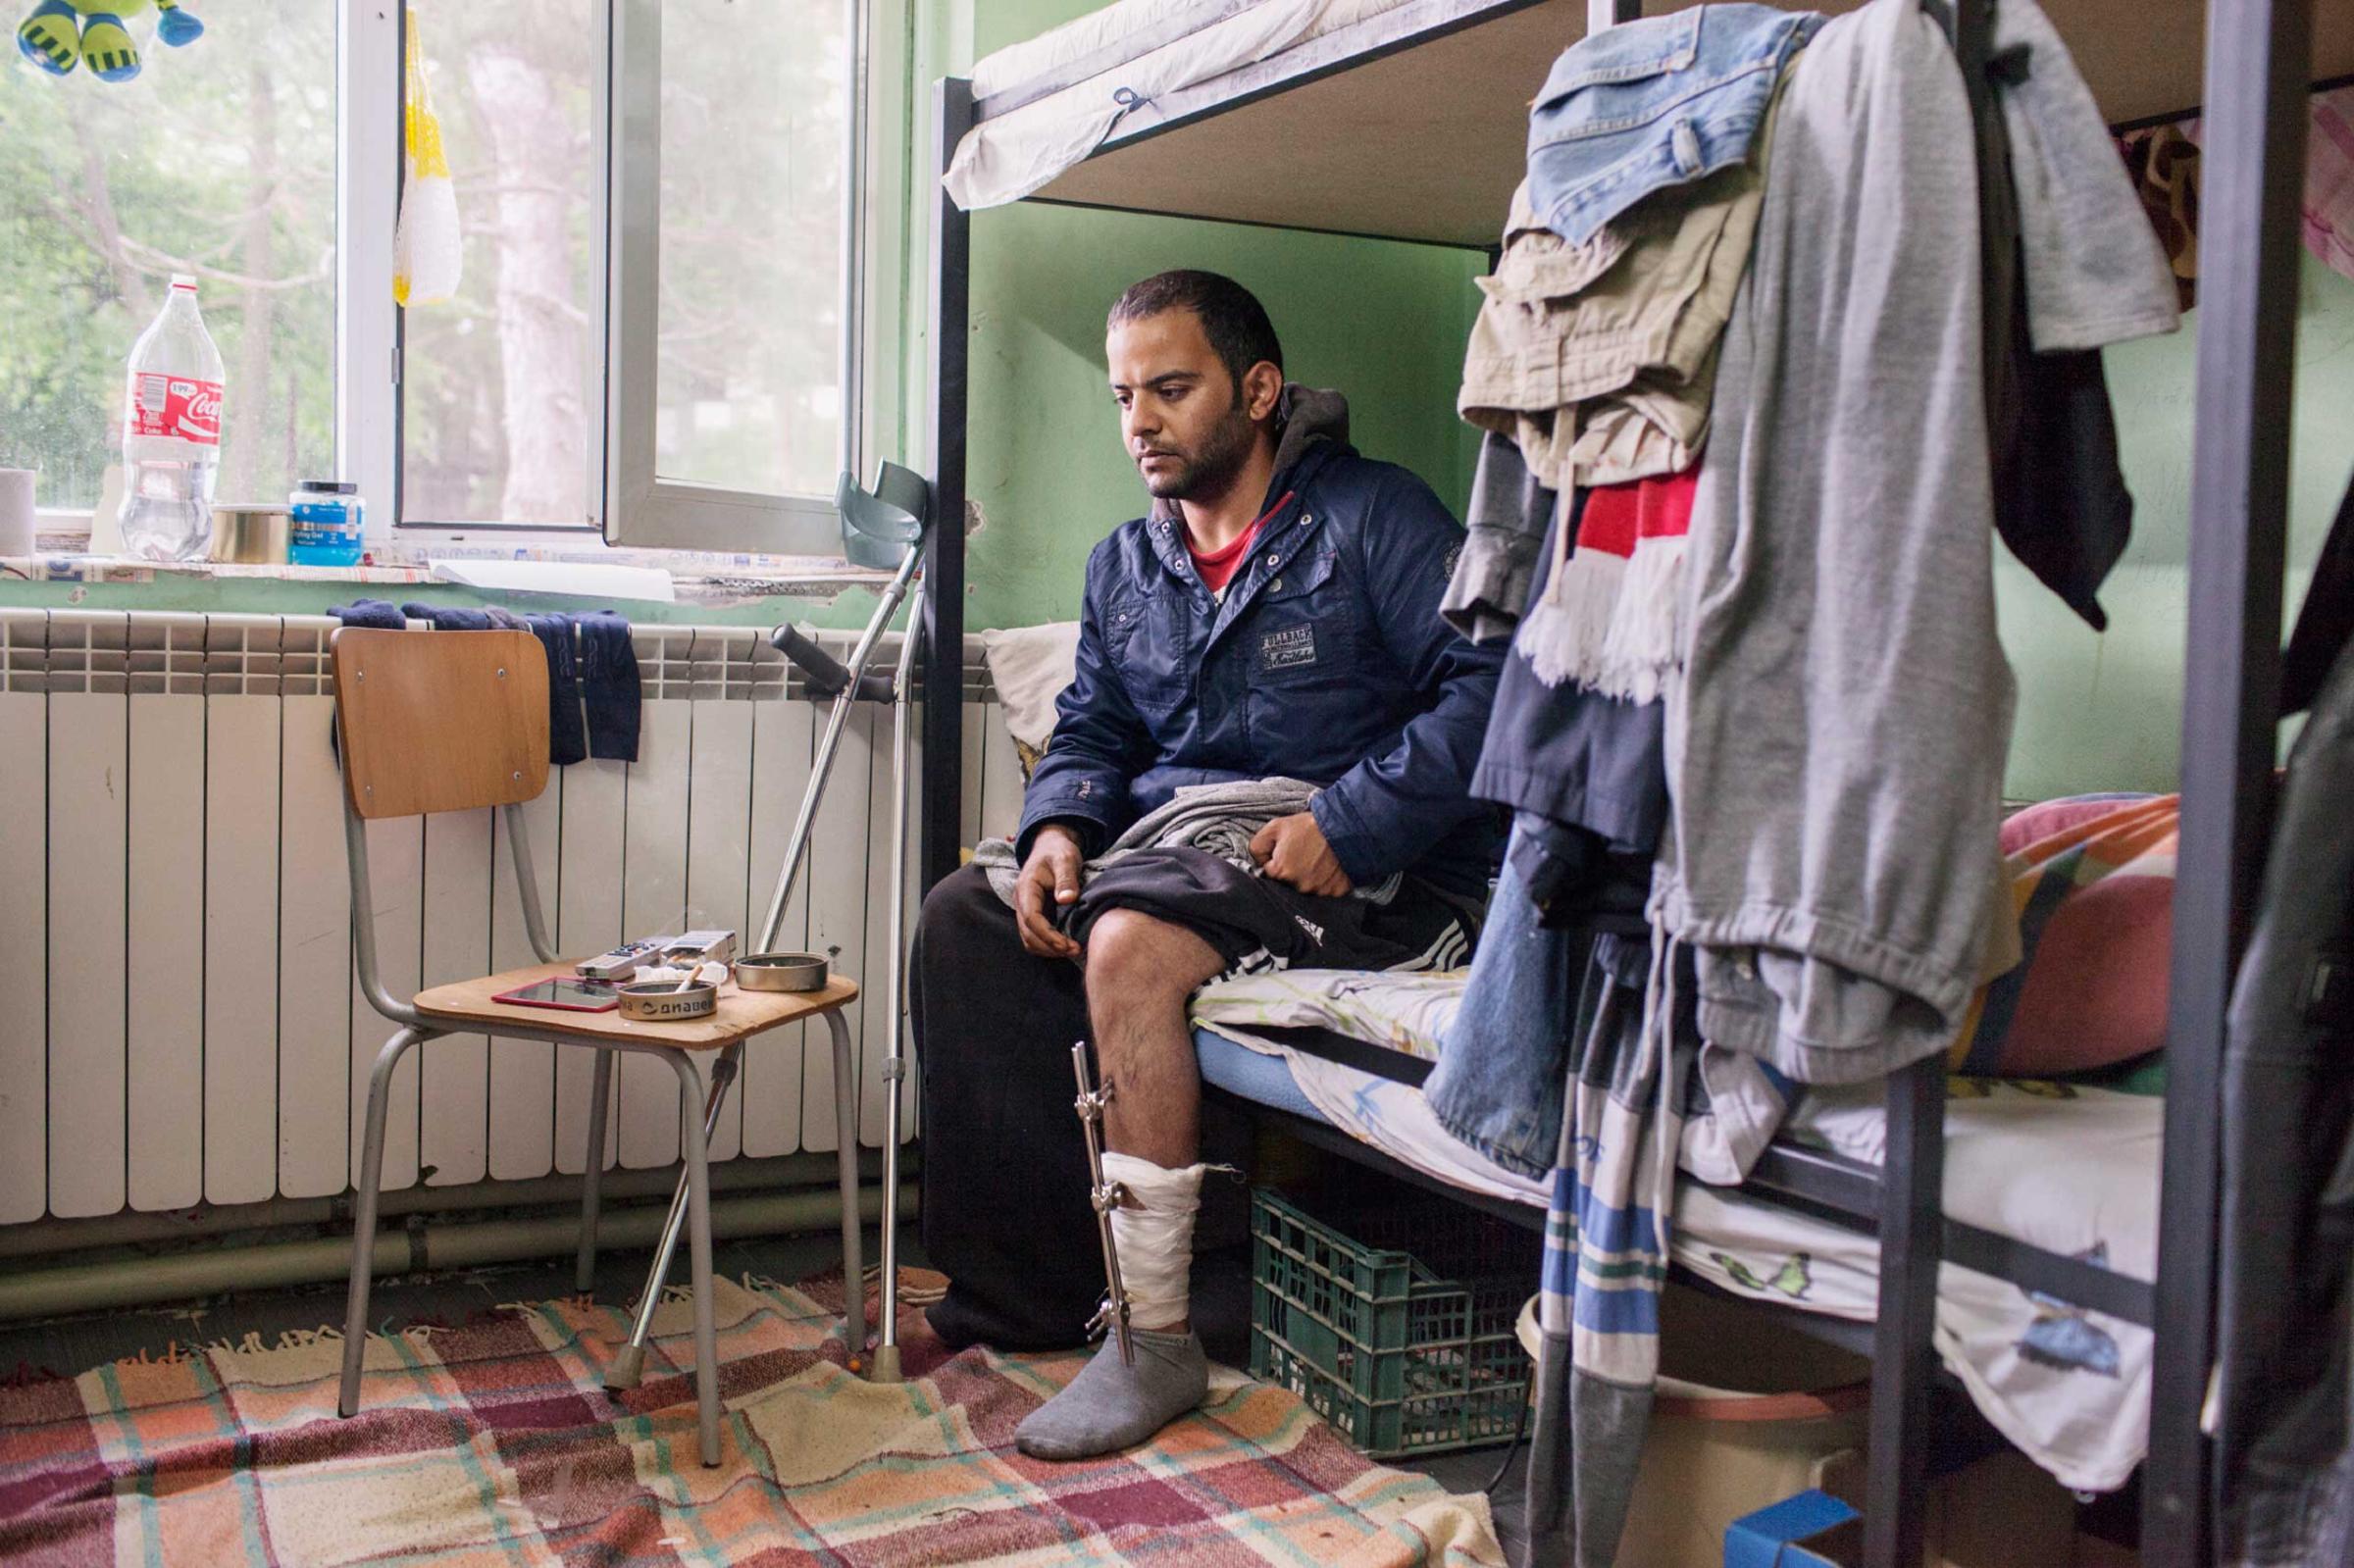 Nezarisa Sakhi, a 31-year-old Iraqi, who claimed he worked for the U.S. Army in Iraq, fled to Europe after being threatened. In Bulgaria, he was attacked by local vigilantes. He has resided at the Banya refugee center in Bulgaria, May 16, 2014.